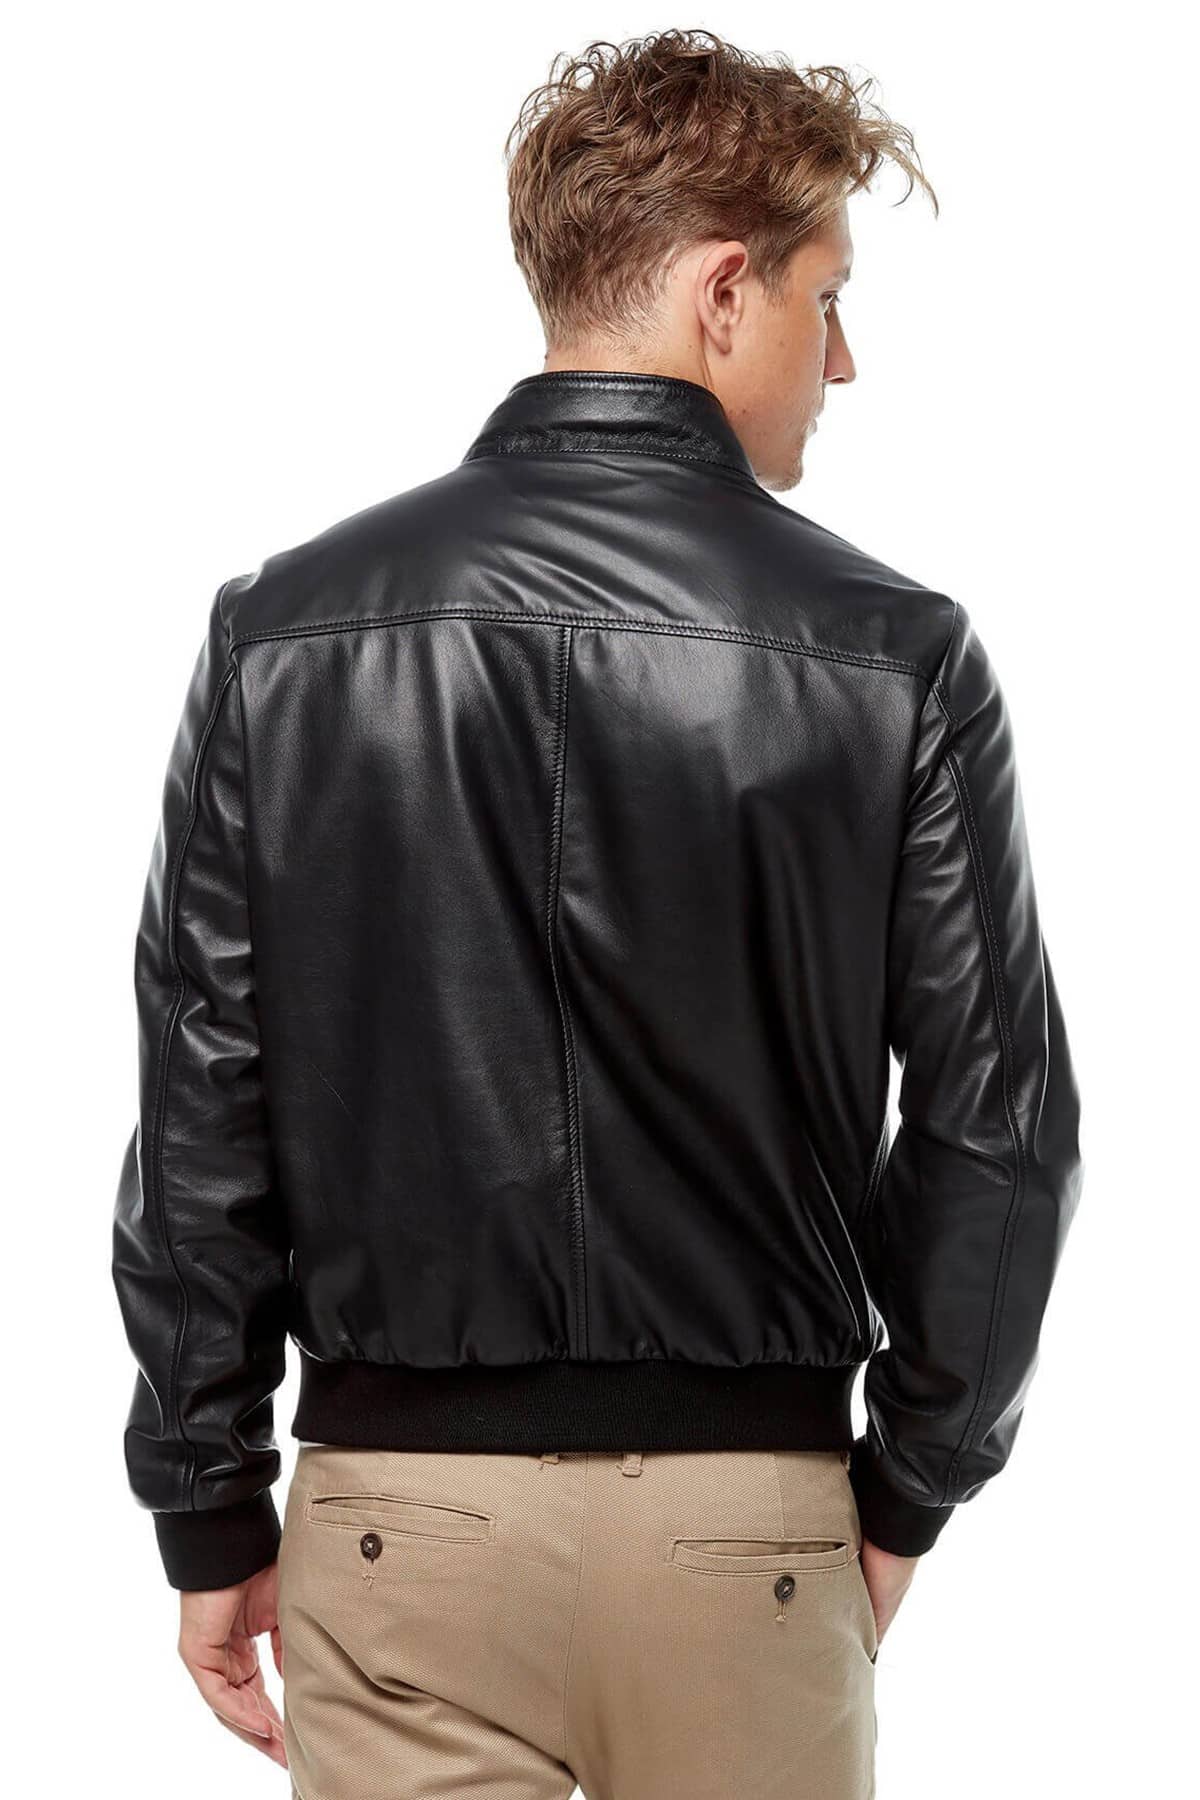 Men's 100 % Real Black Leather Double Sided Force Jacket